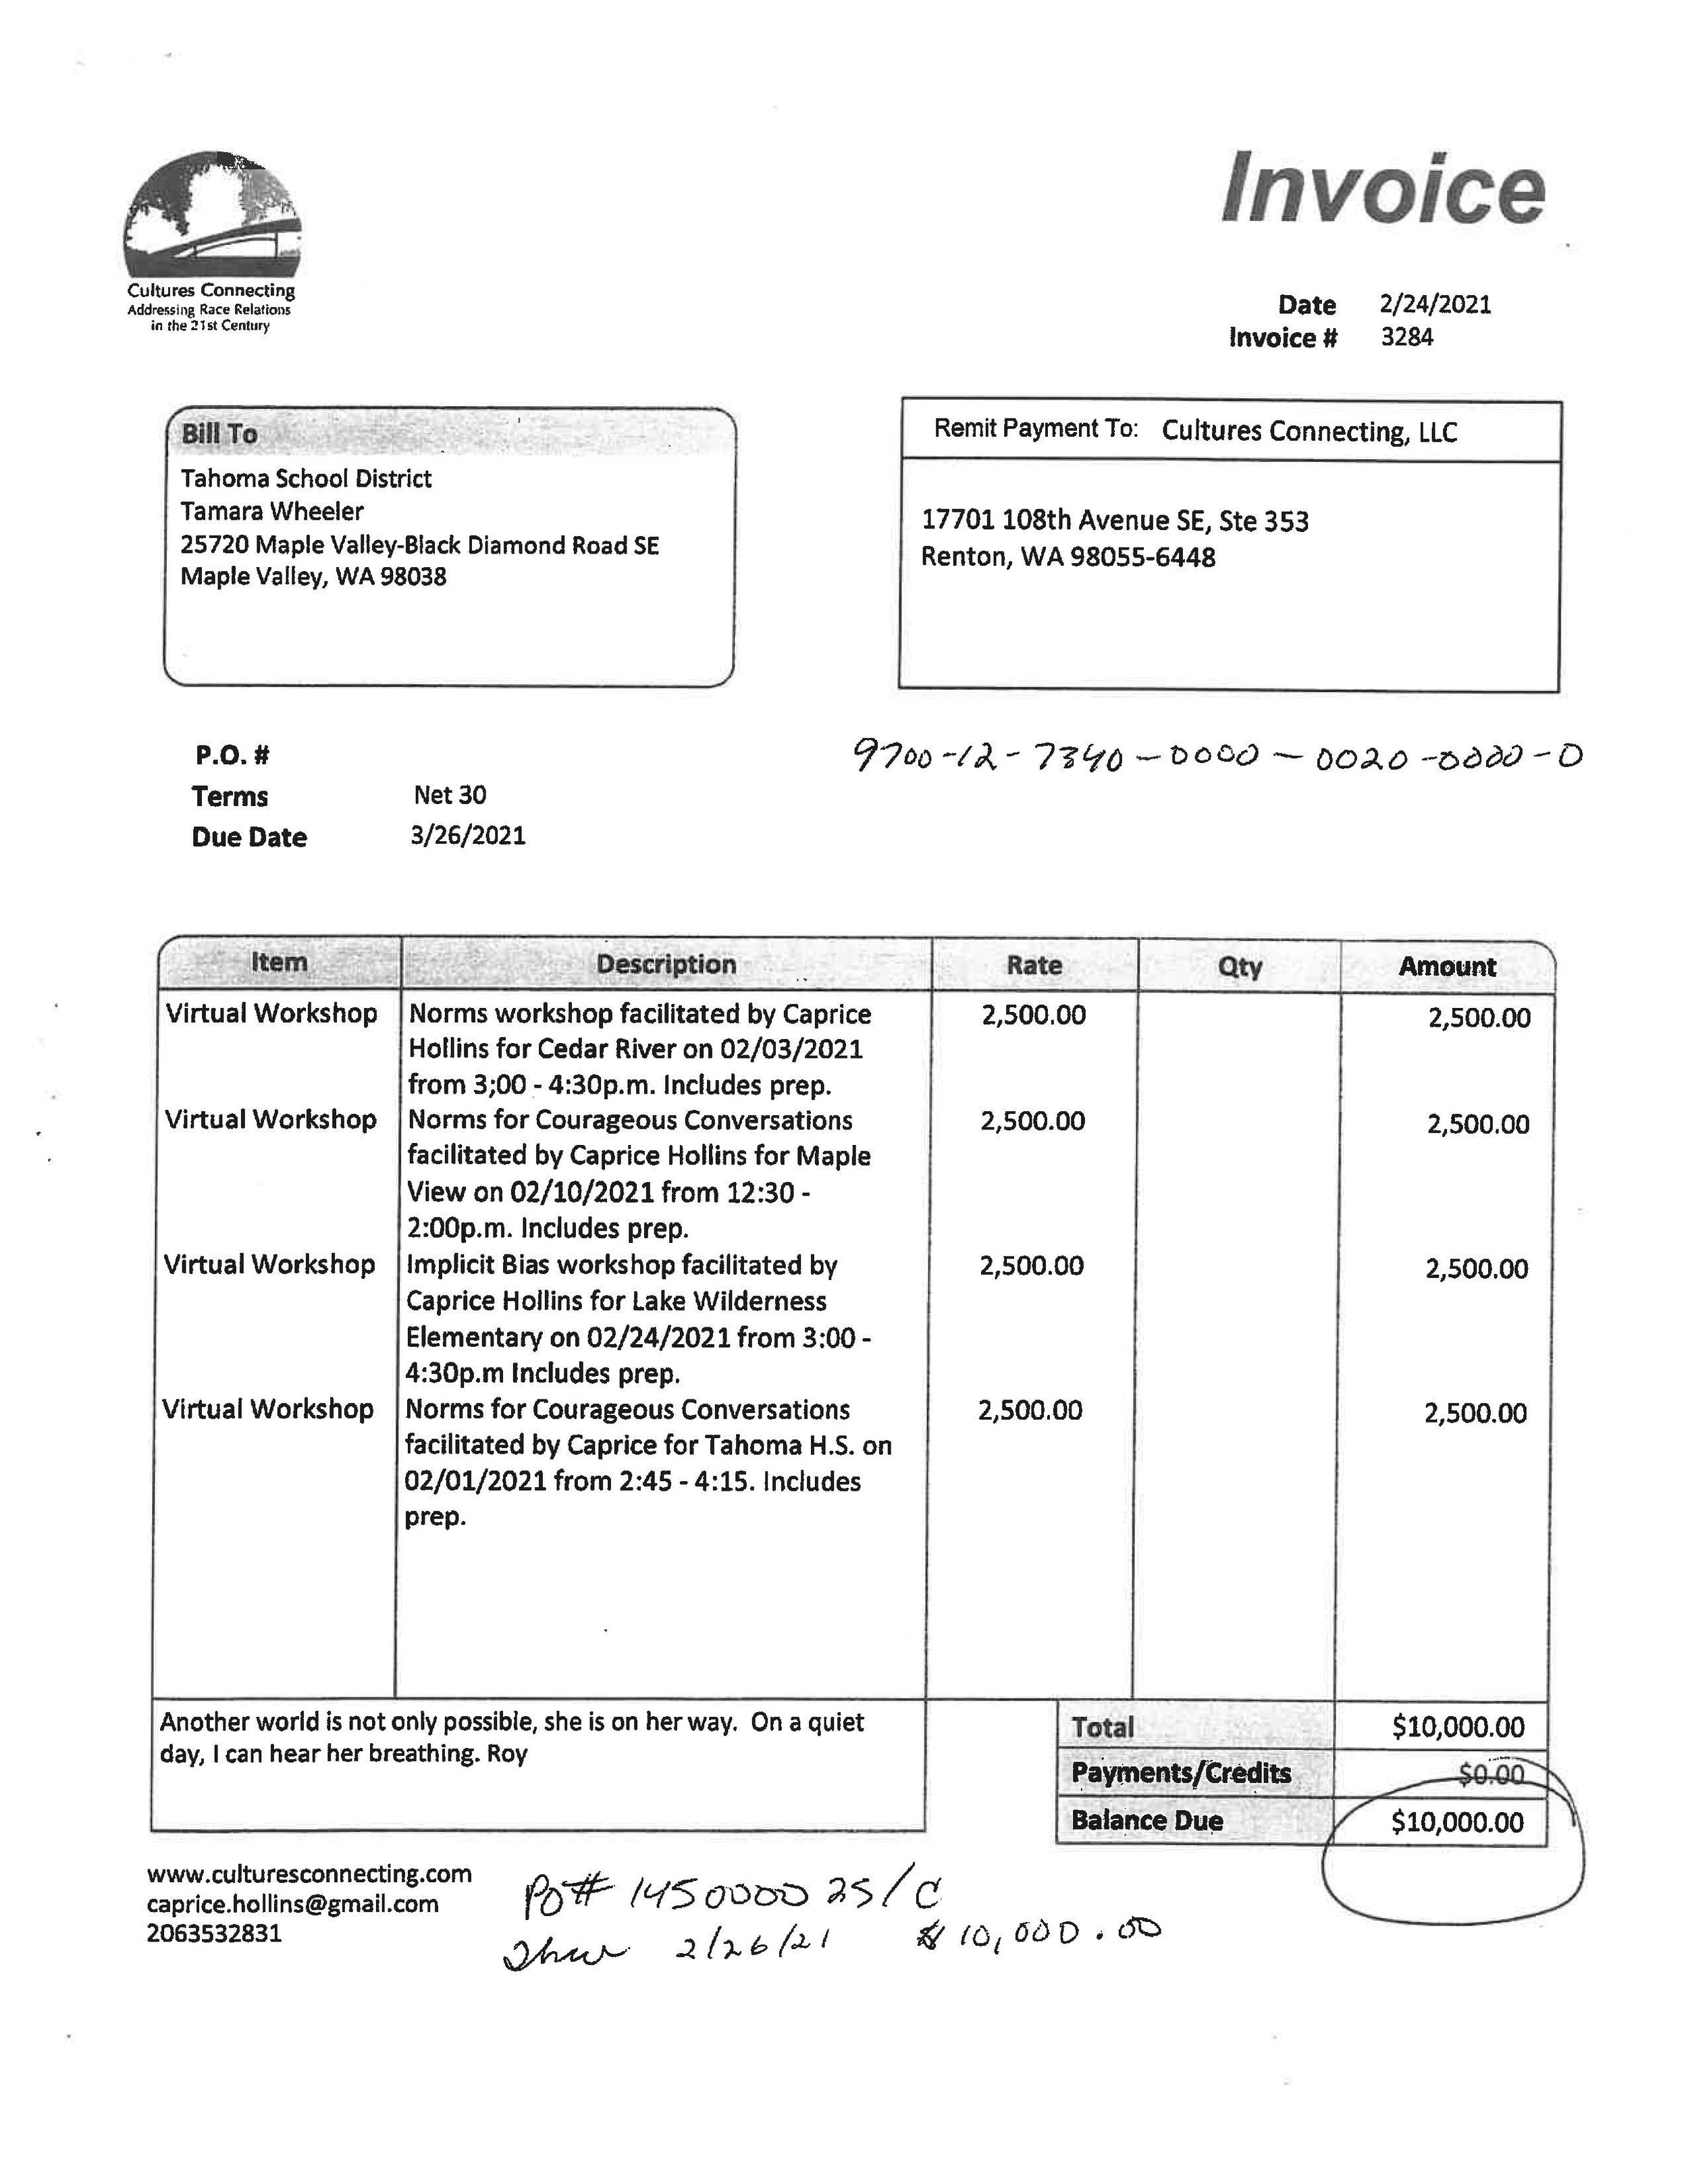 CH invoices_Page_08.jpg